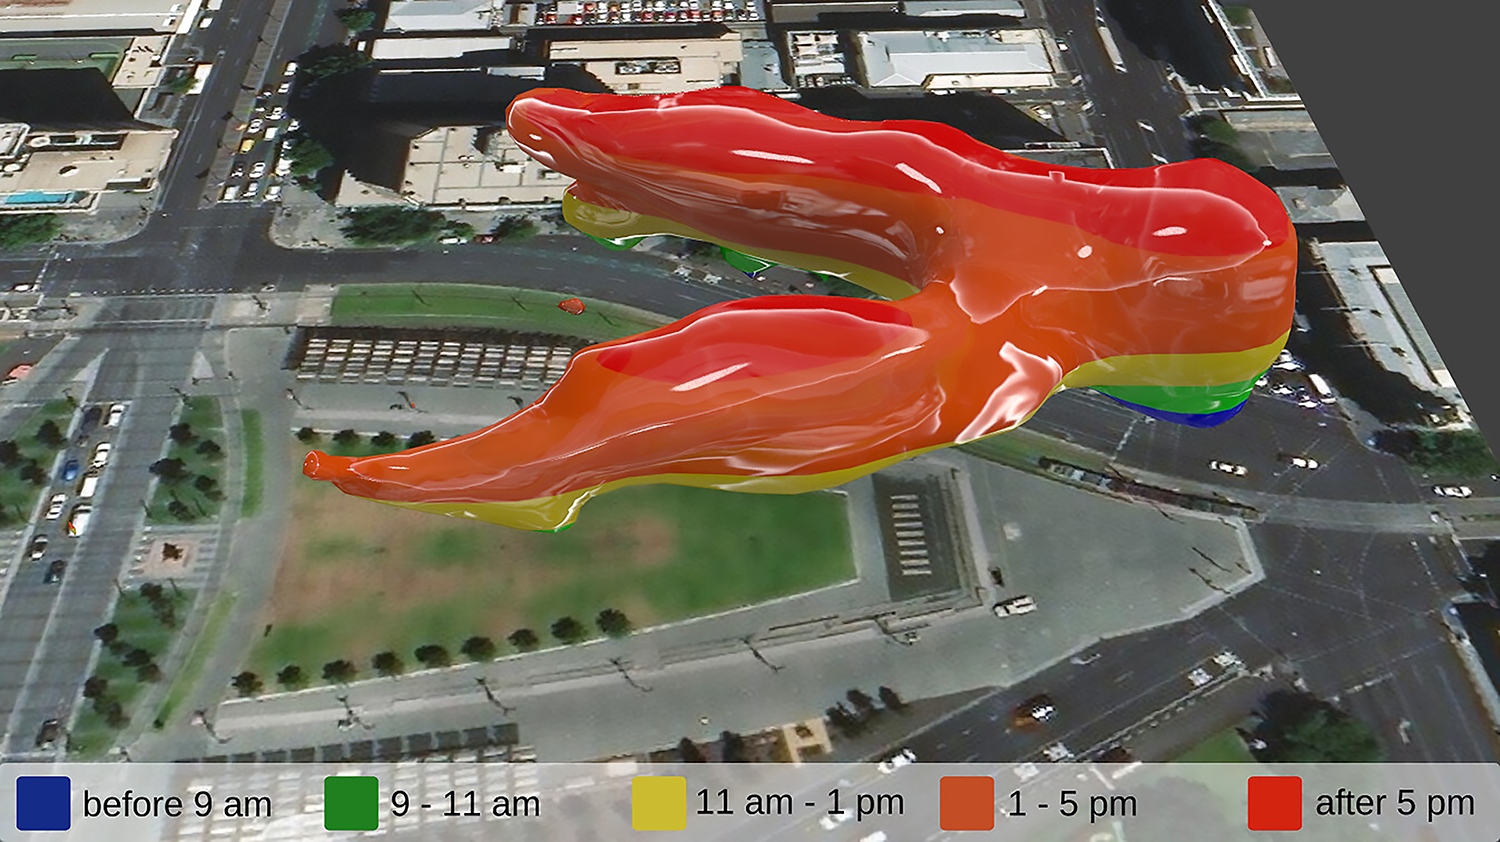 3D visualization of foot traffic through a public plaza